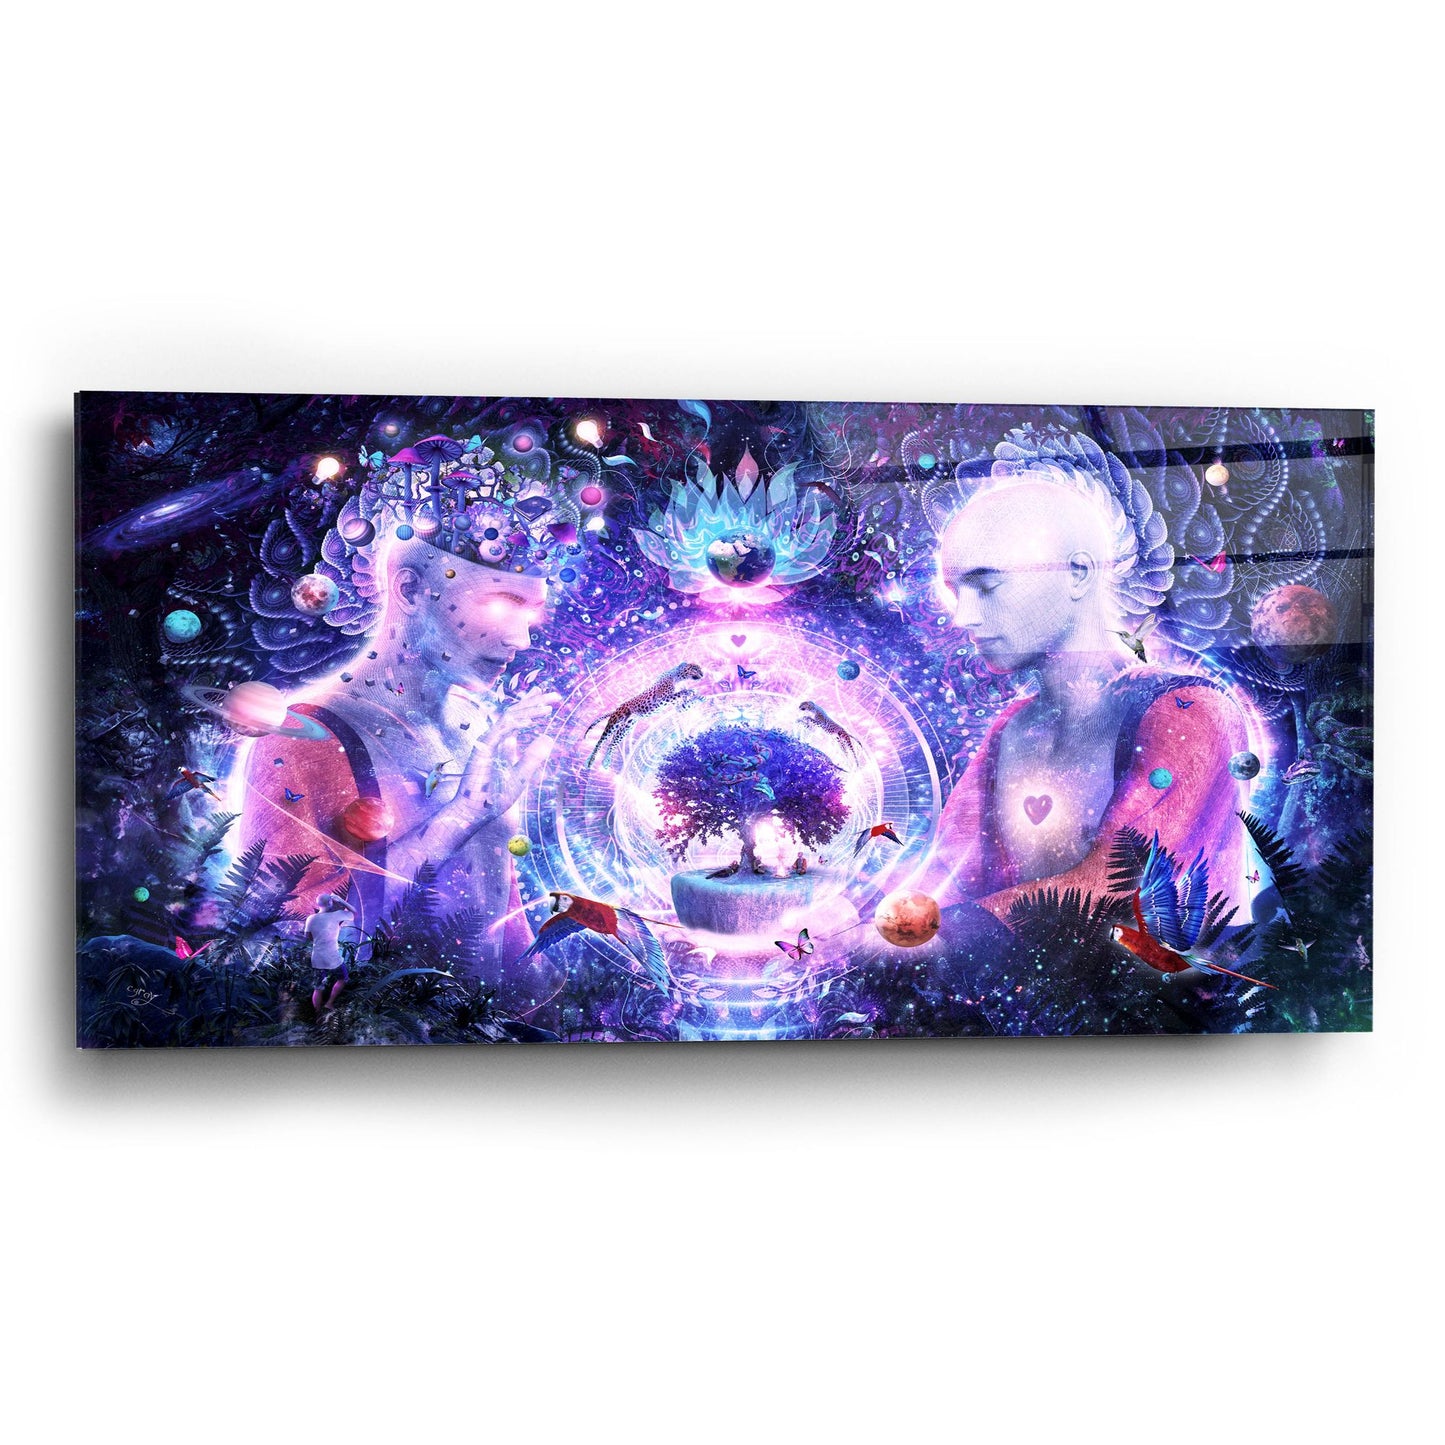 Epic Art 'A Spark In The Universe' by Cameron Gray, Acrylic Glass Wall Art,24x12